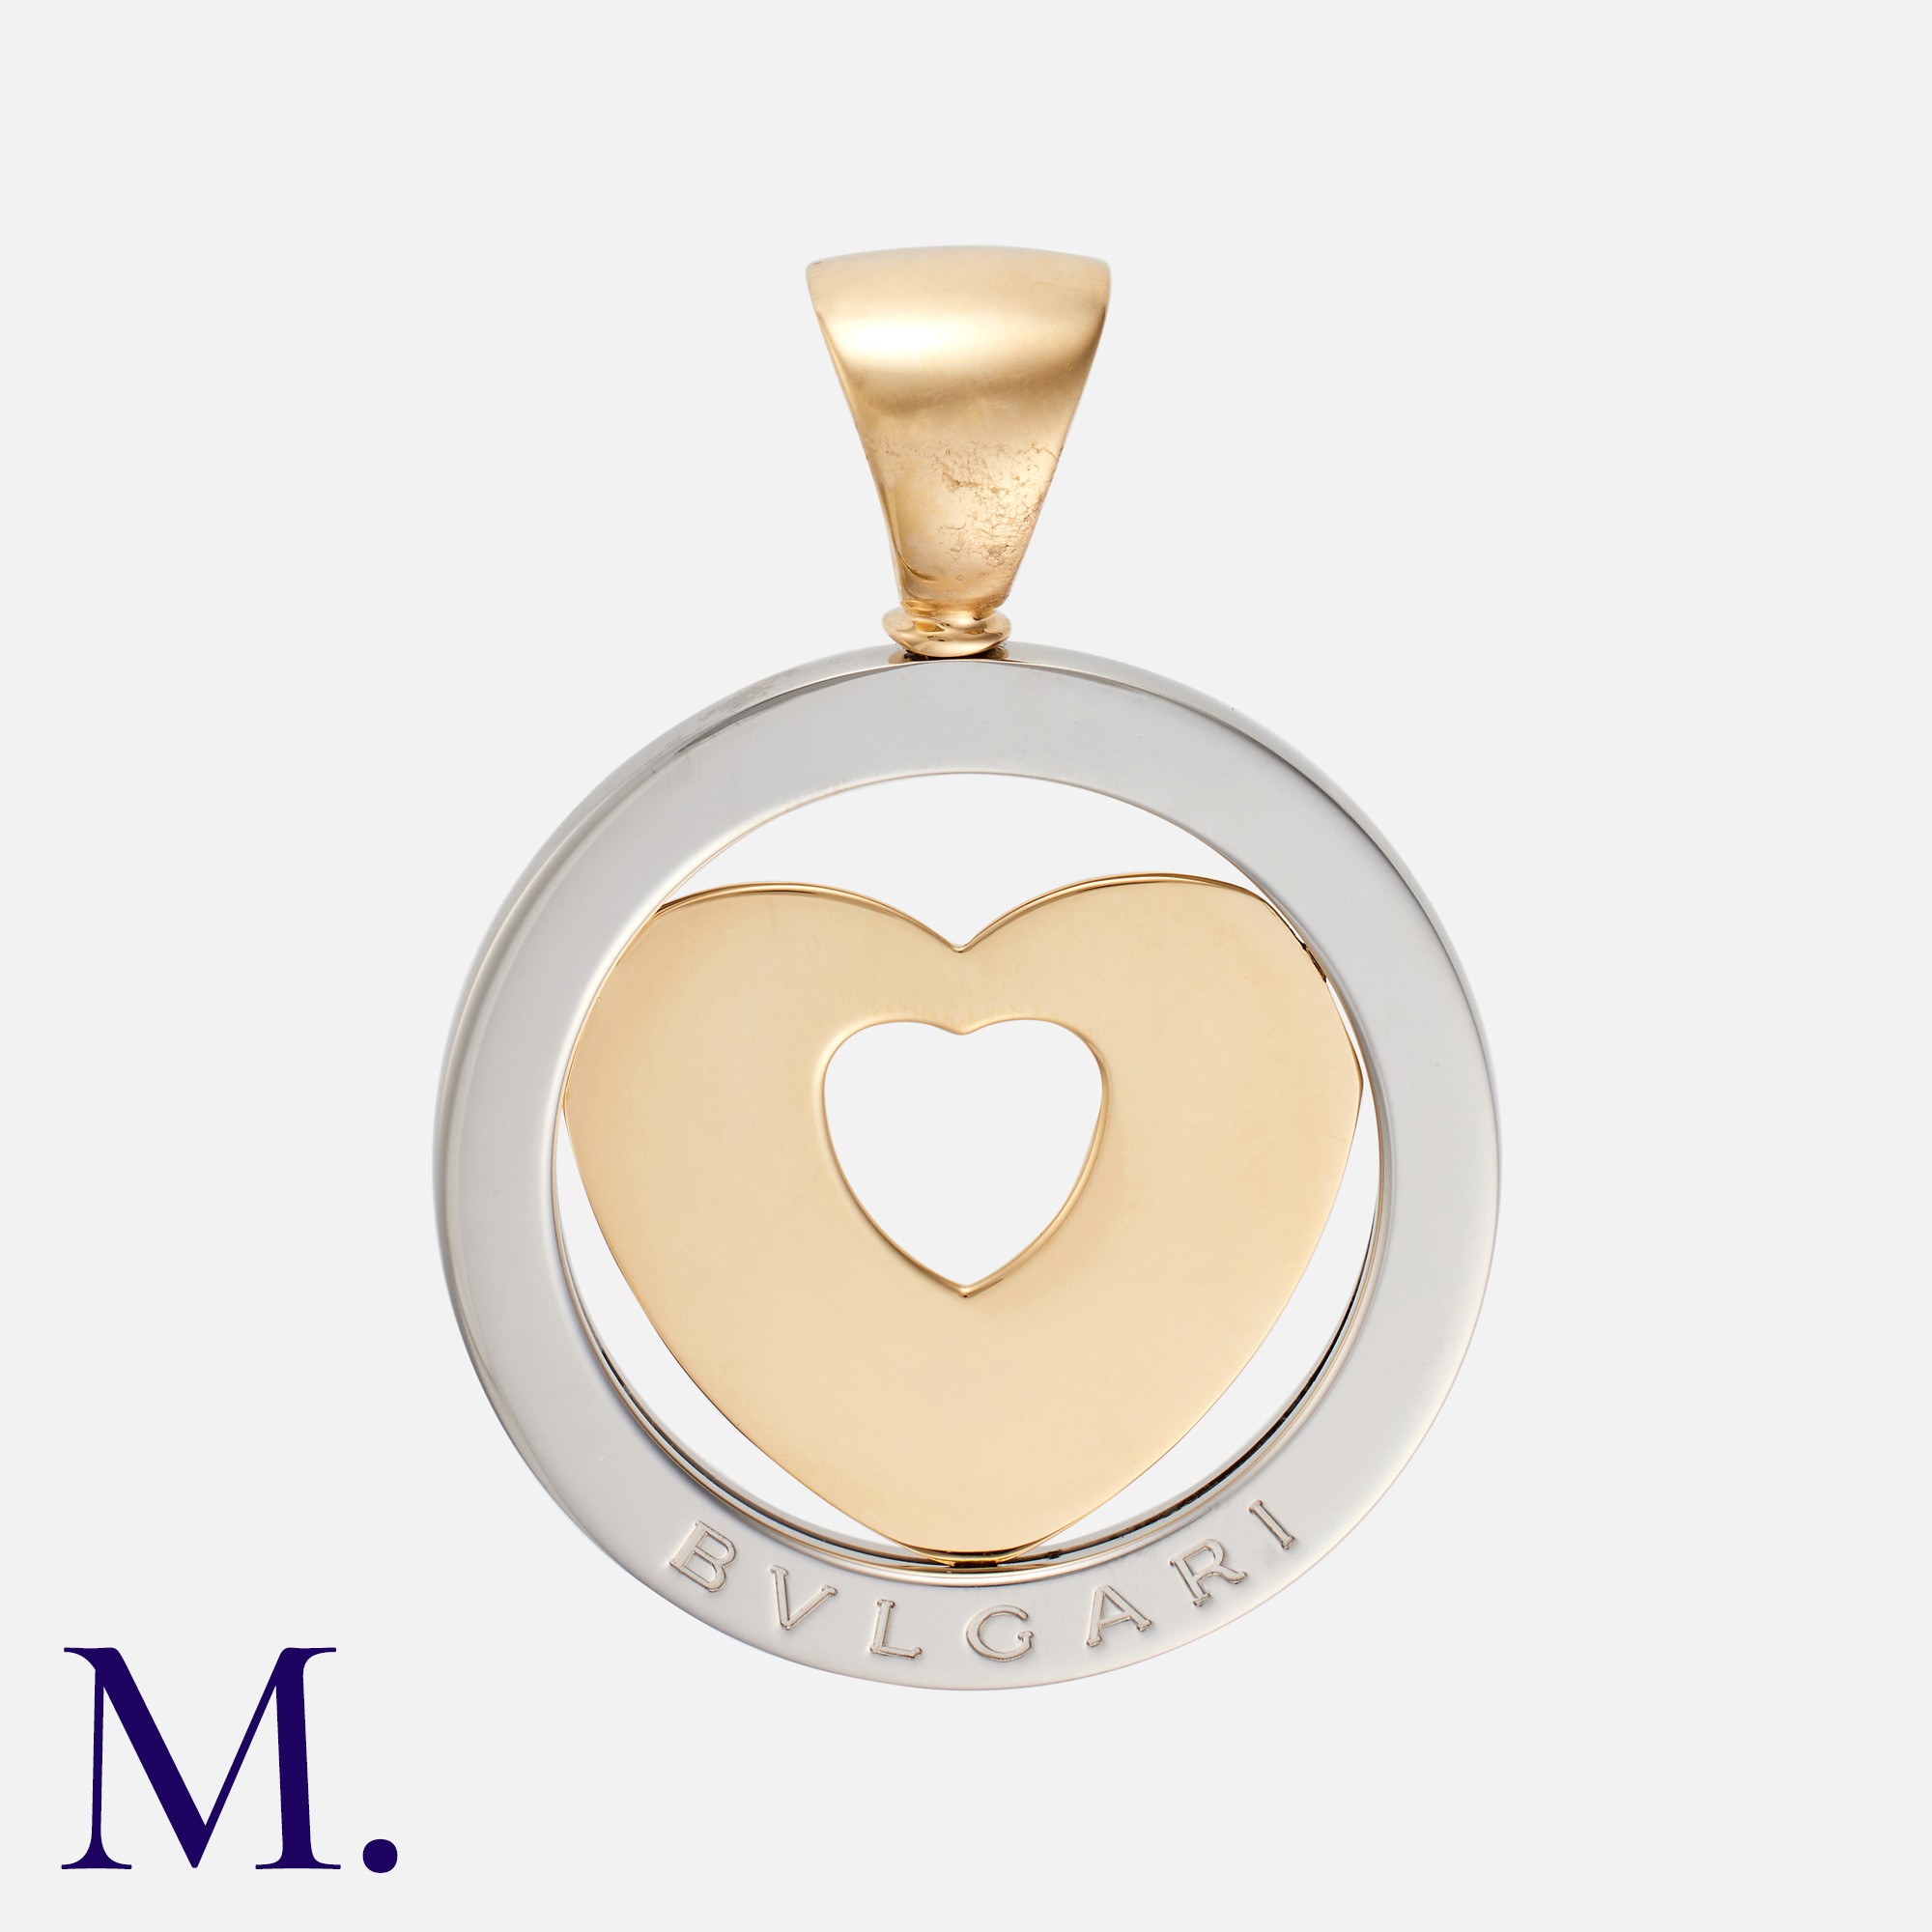 BULGARI. A Tondo Heart Pendant in 18k yellow gold and stainless steel, the stainless steel circle